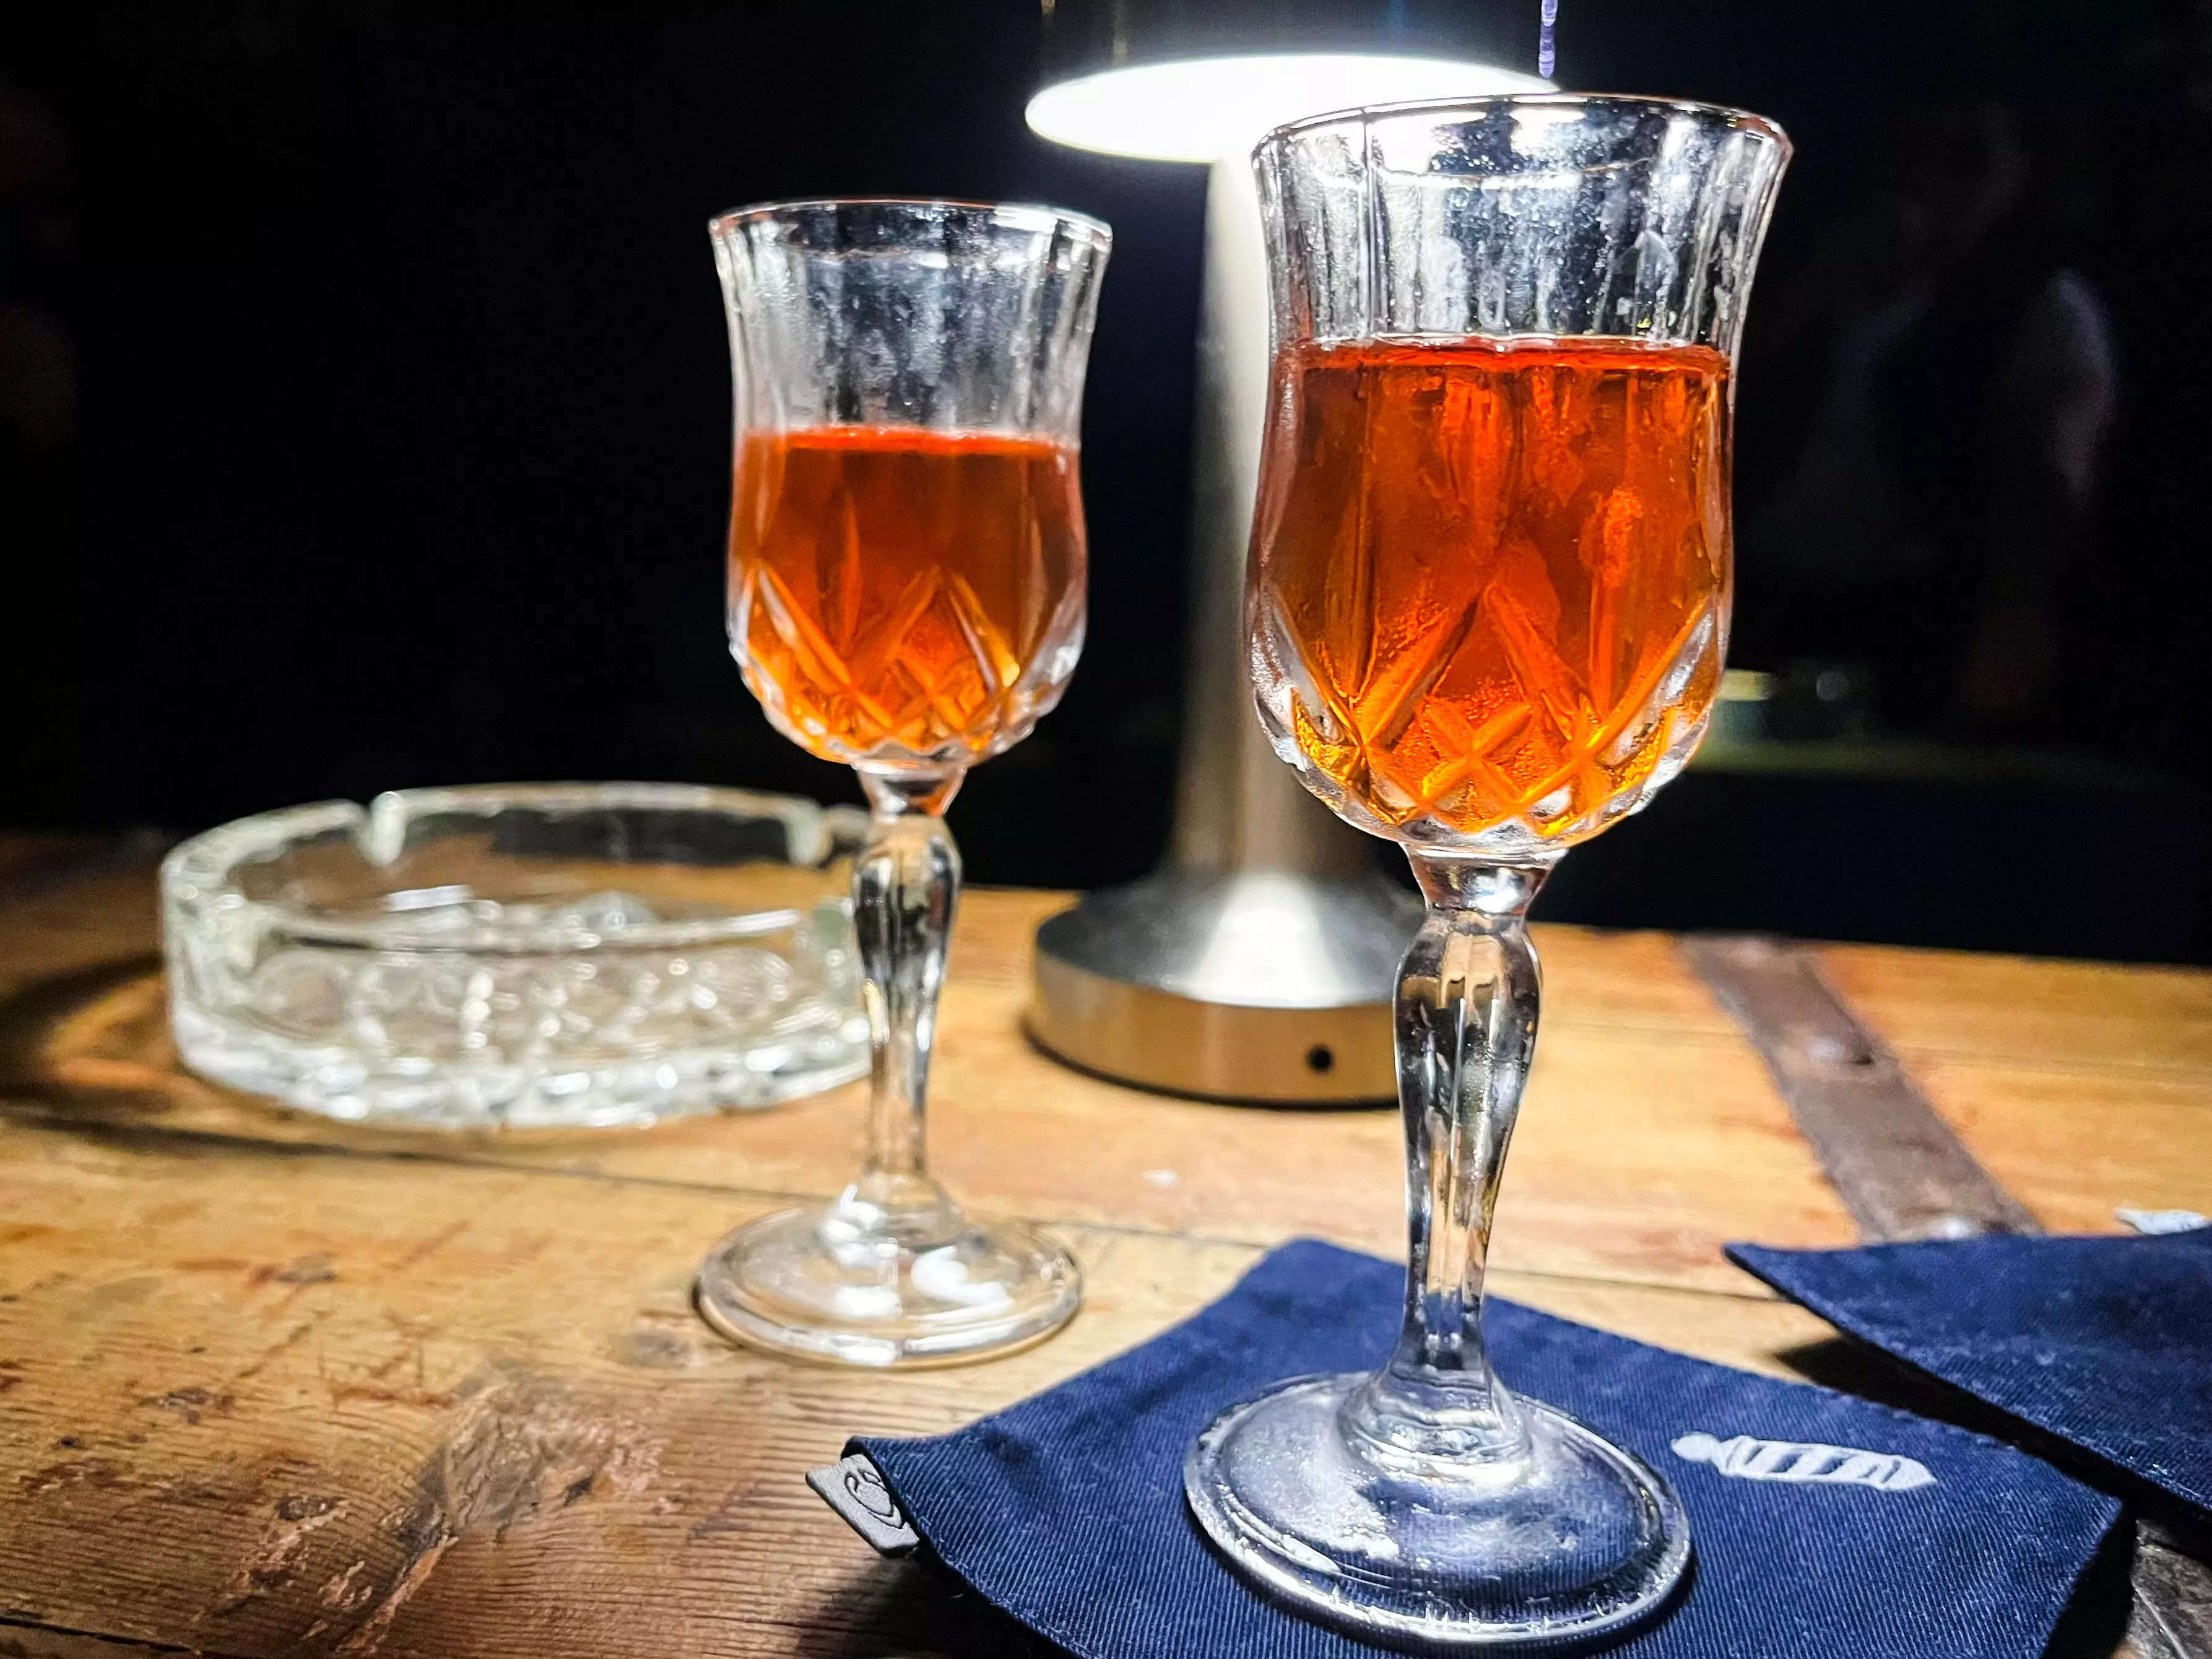 Two Negroni cocktails from The Barbershop Speakeasy in Rome on a table.